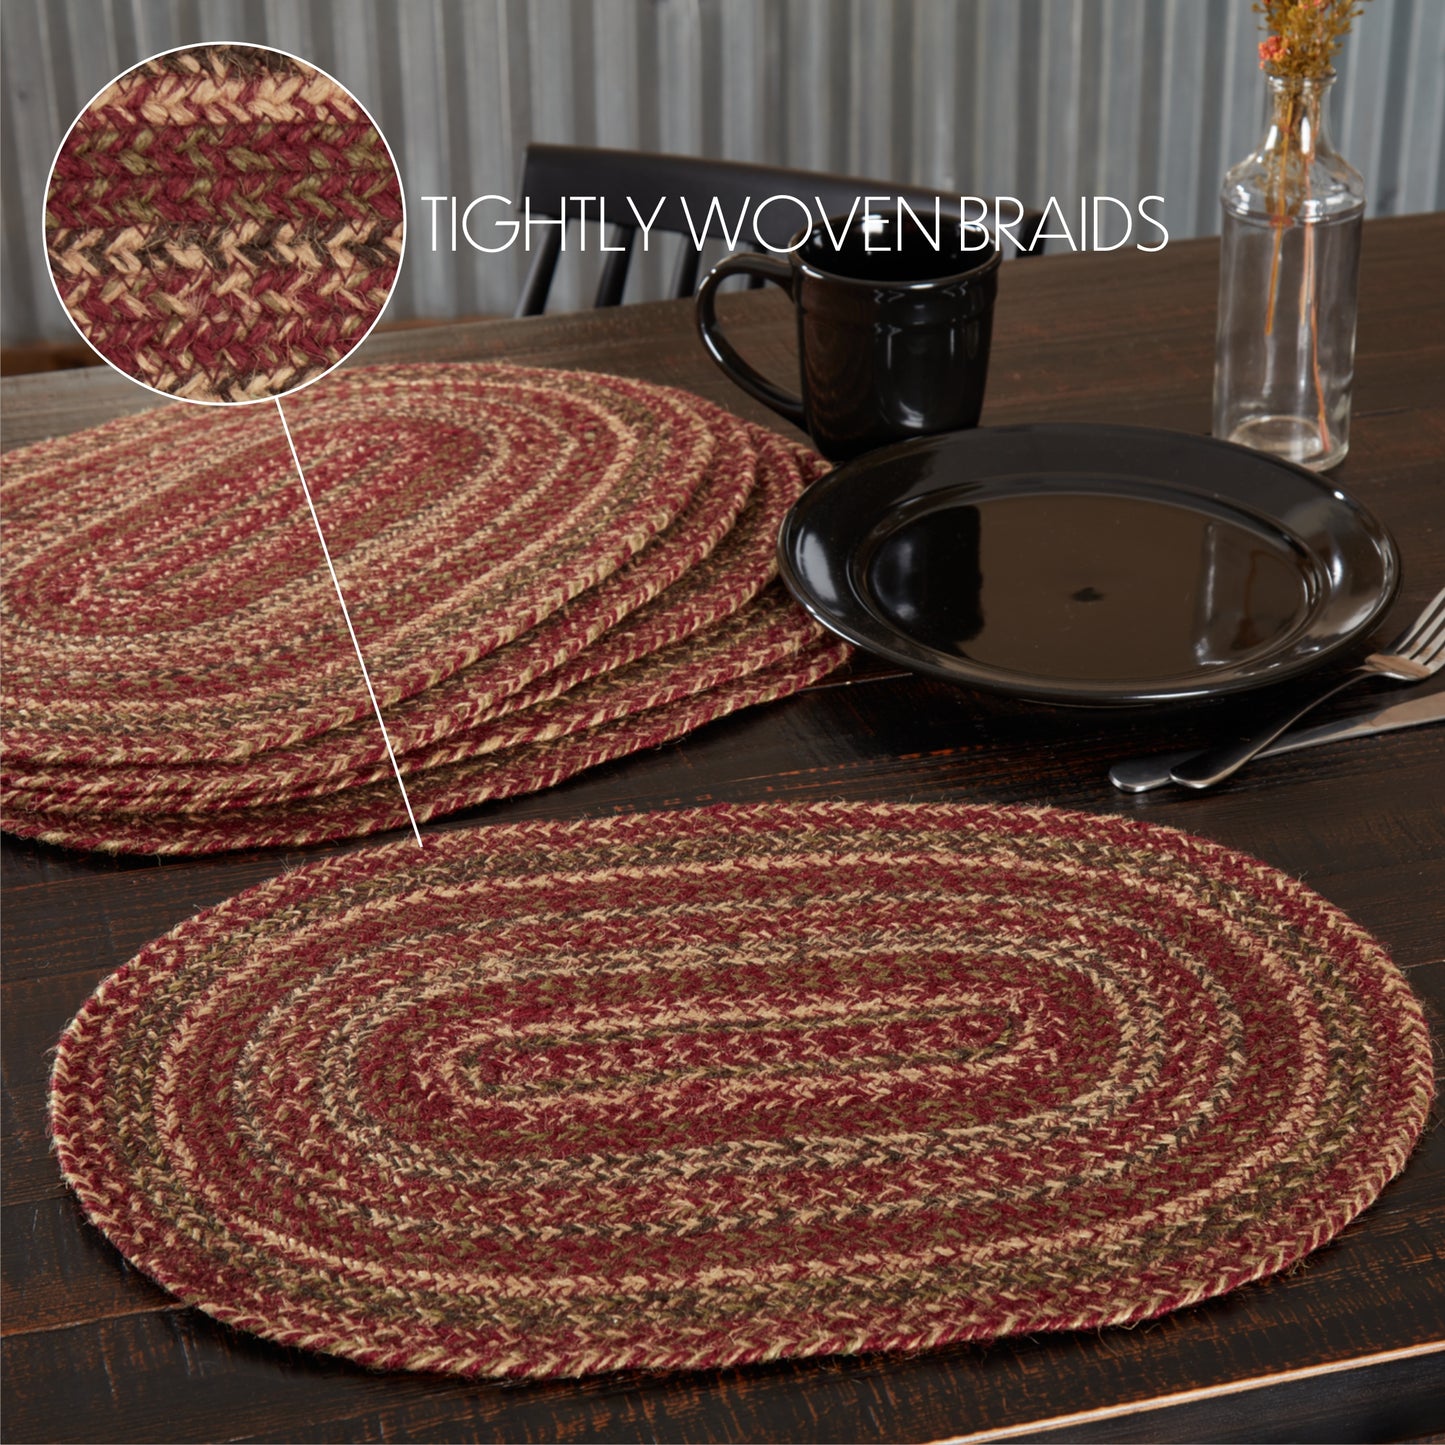 45782-Cider-Mill-Jute-Placemat-Set-of-6-12x18-image-2